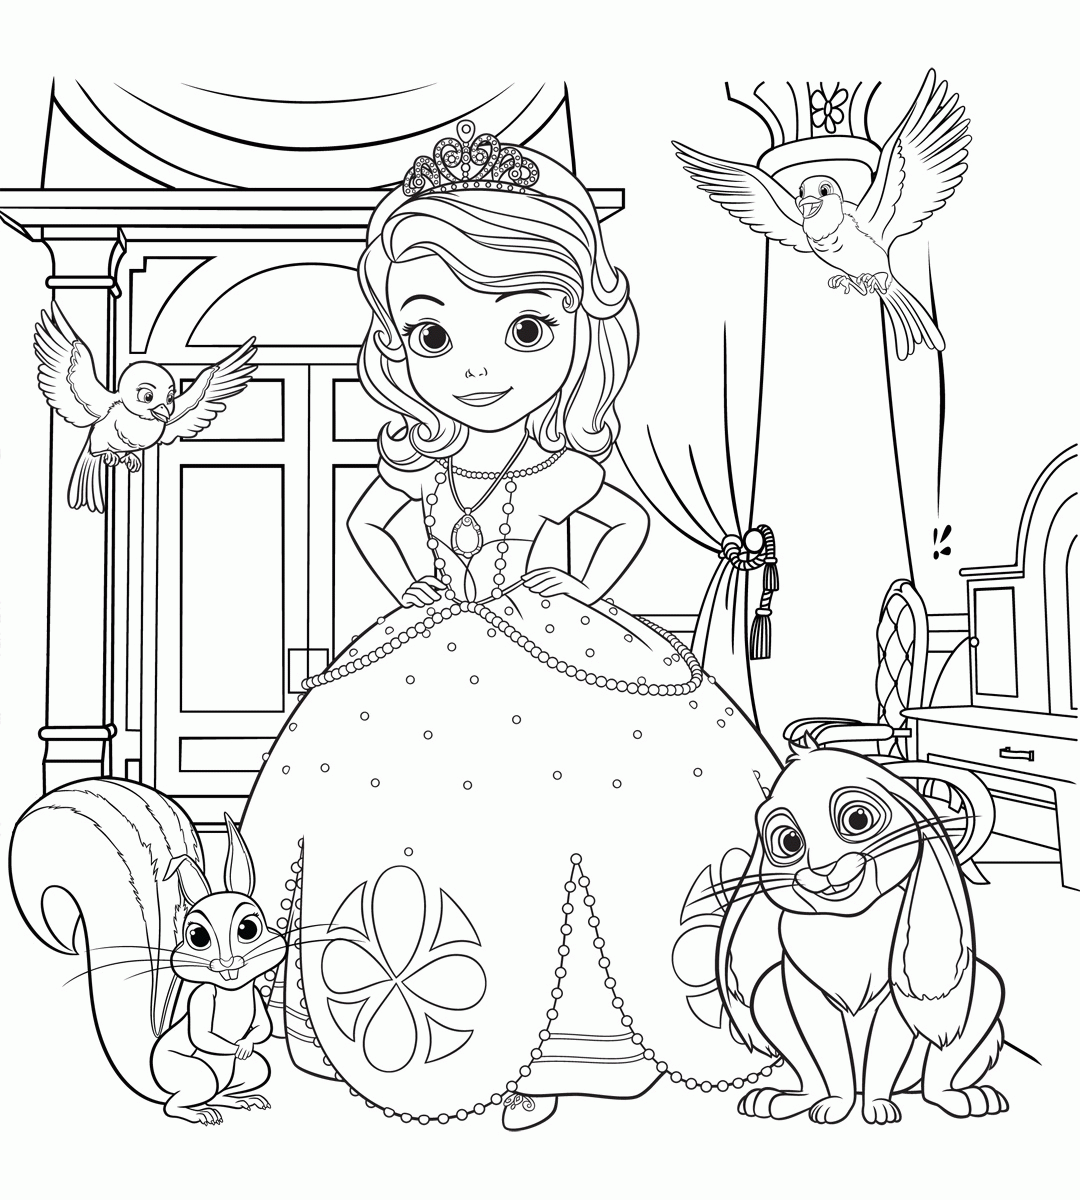 Sofia the First Coloring Pages   Best Coloring Pages For Kids